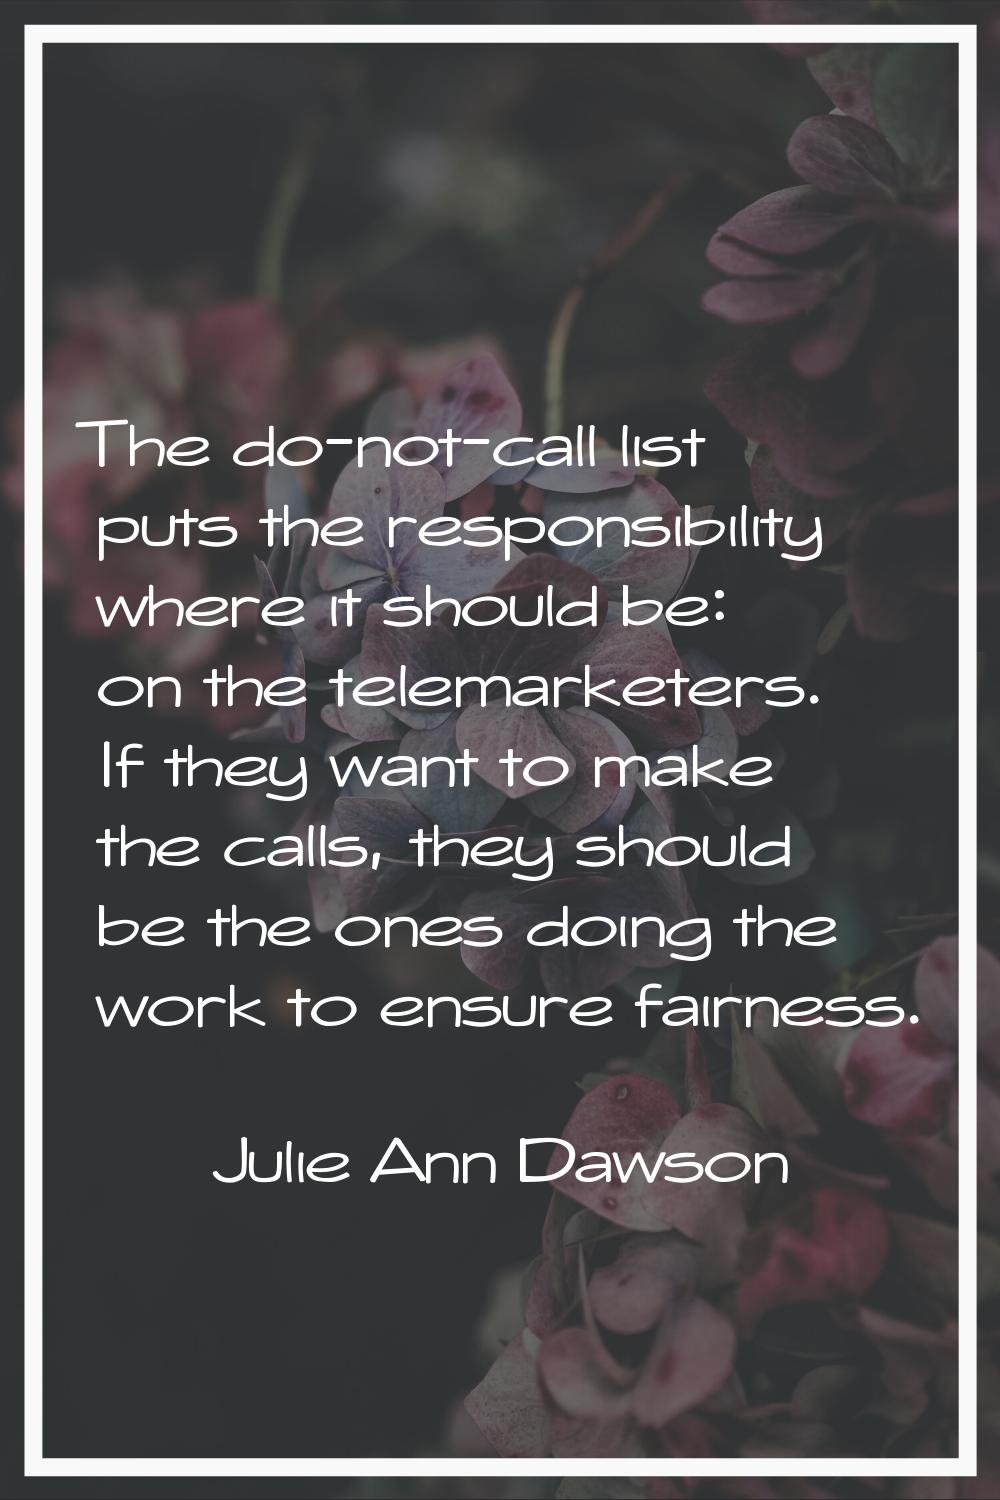 The do-not-call list puts the responsibility where it should be: on the telemarketers. If they want